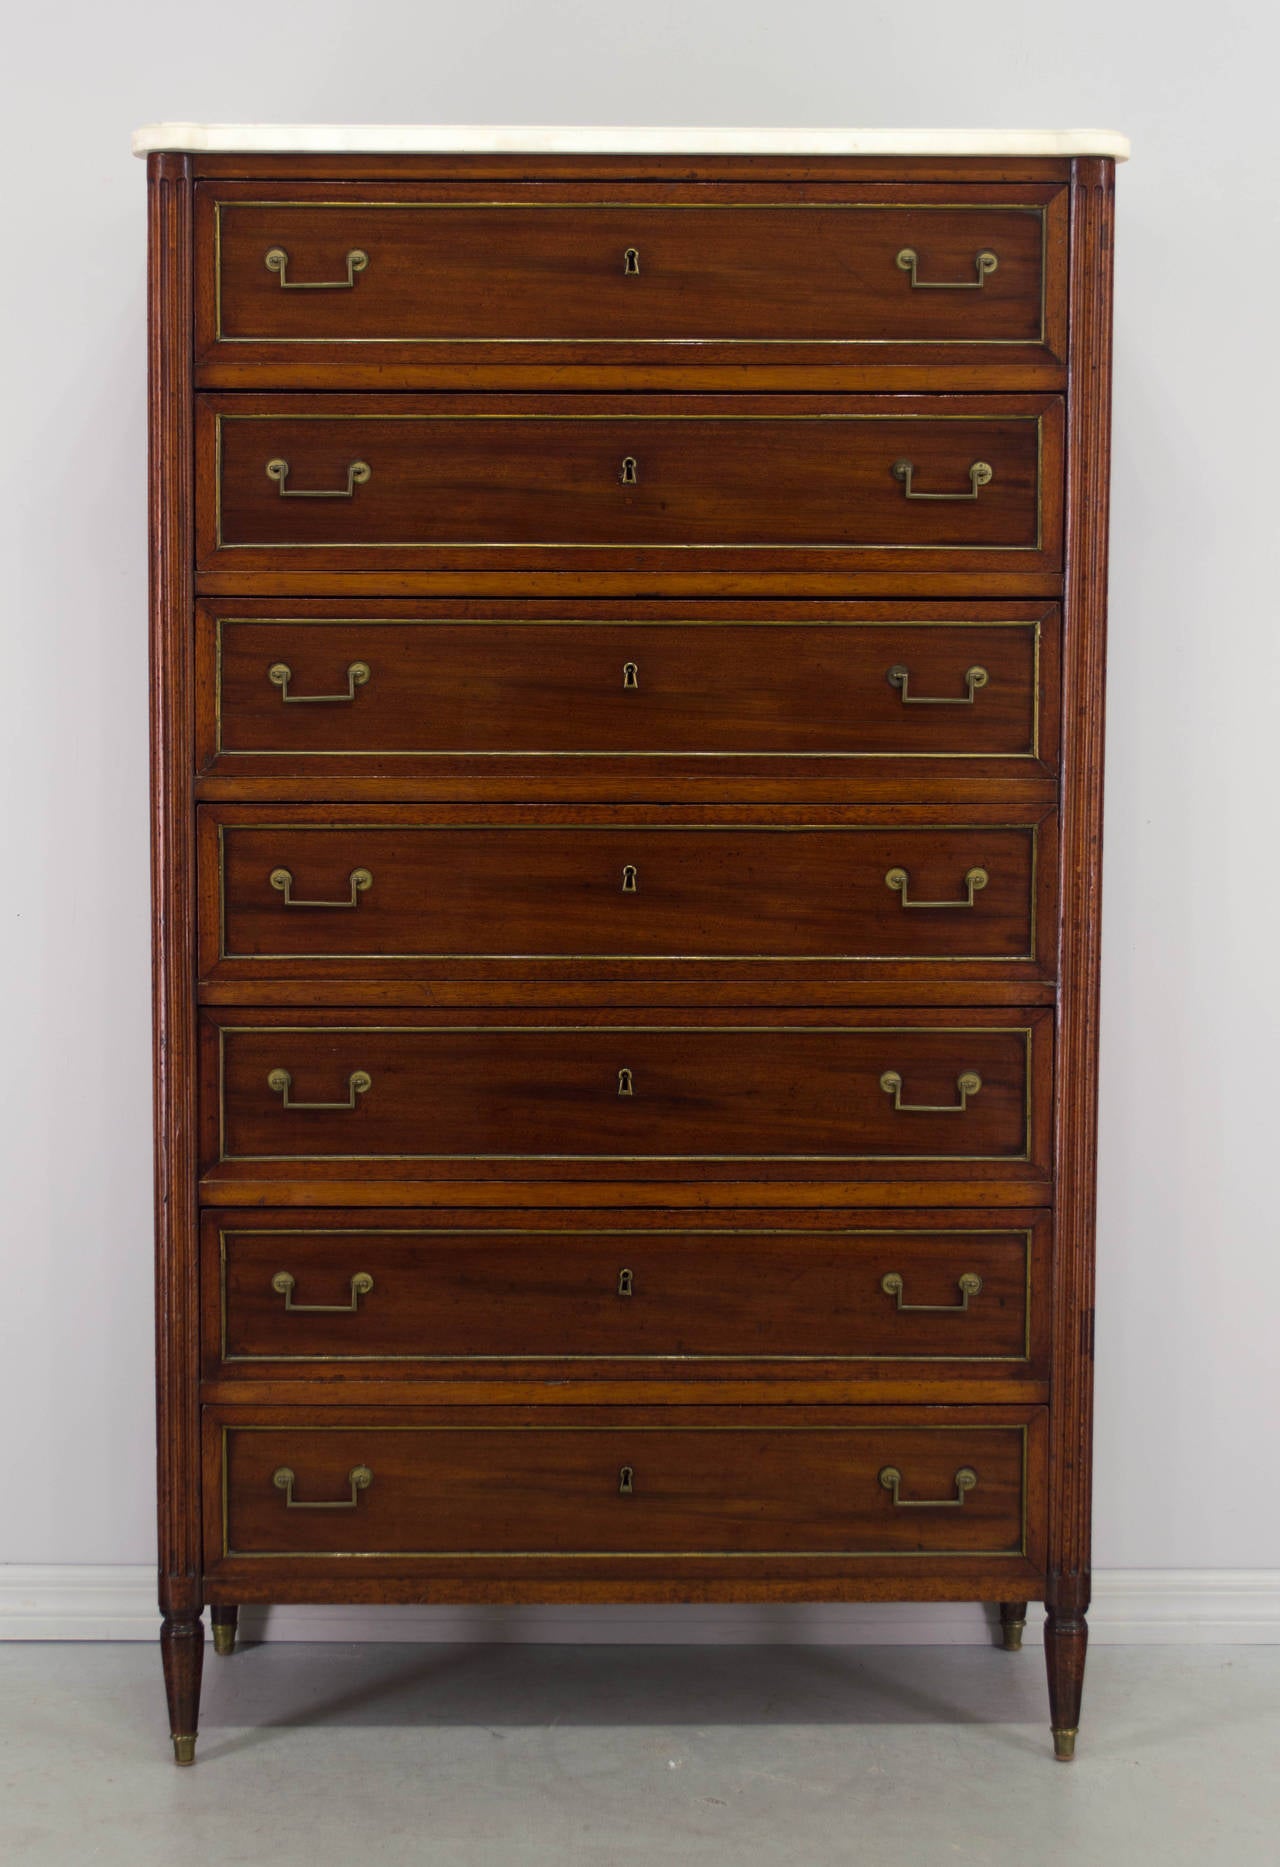 19th century Louis XVI style semainier or gentleman's chest with seven long dovetailed drawers originally meant to hold a week's supply of clothing. Made of solid and veneer of mahogany with oak as a secondary wood. Nice proportions and subtle